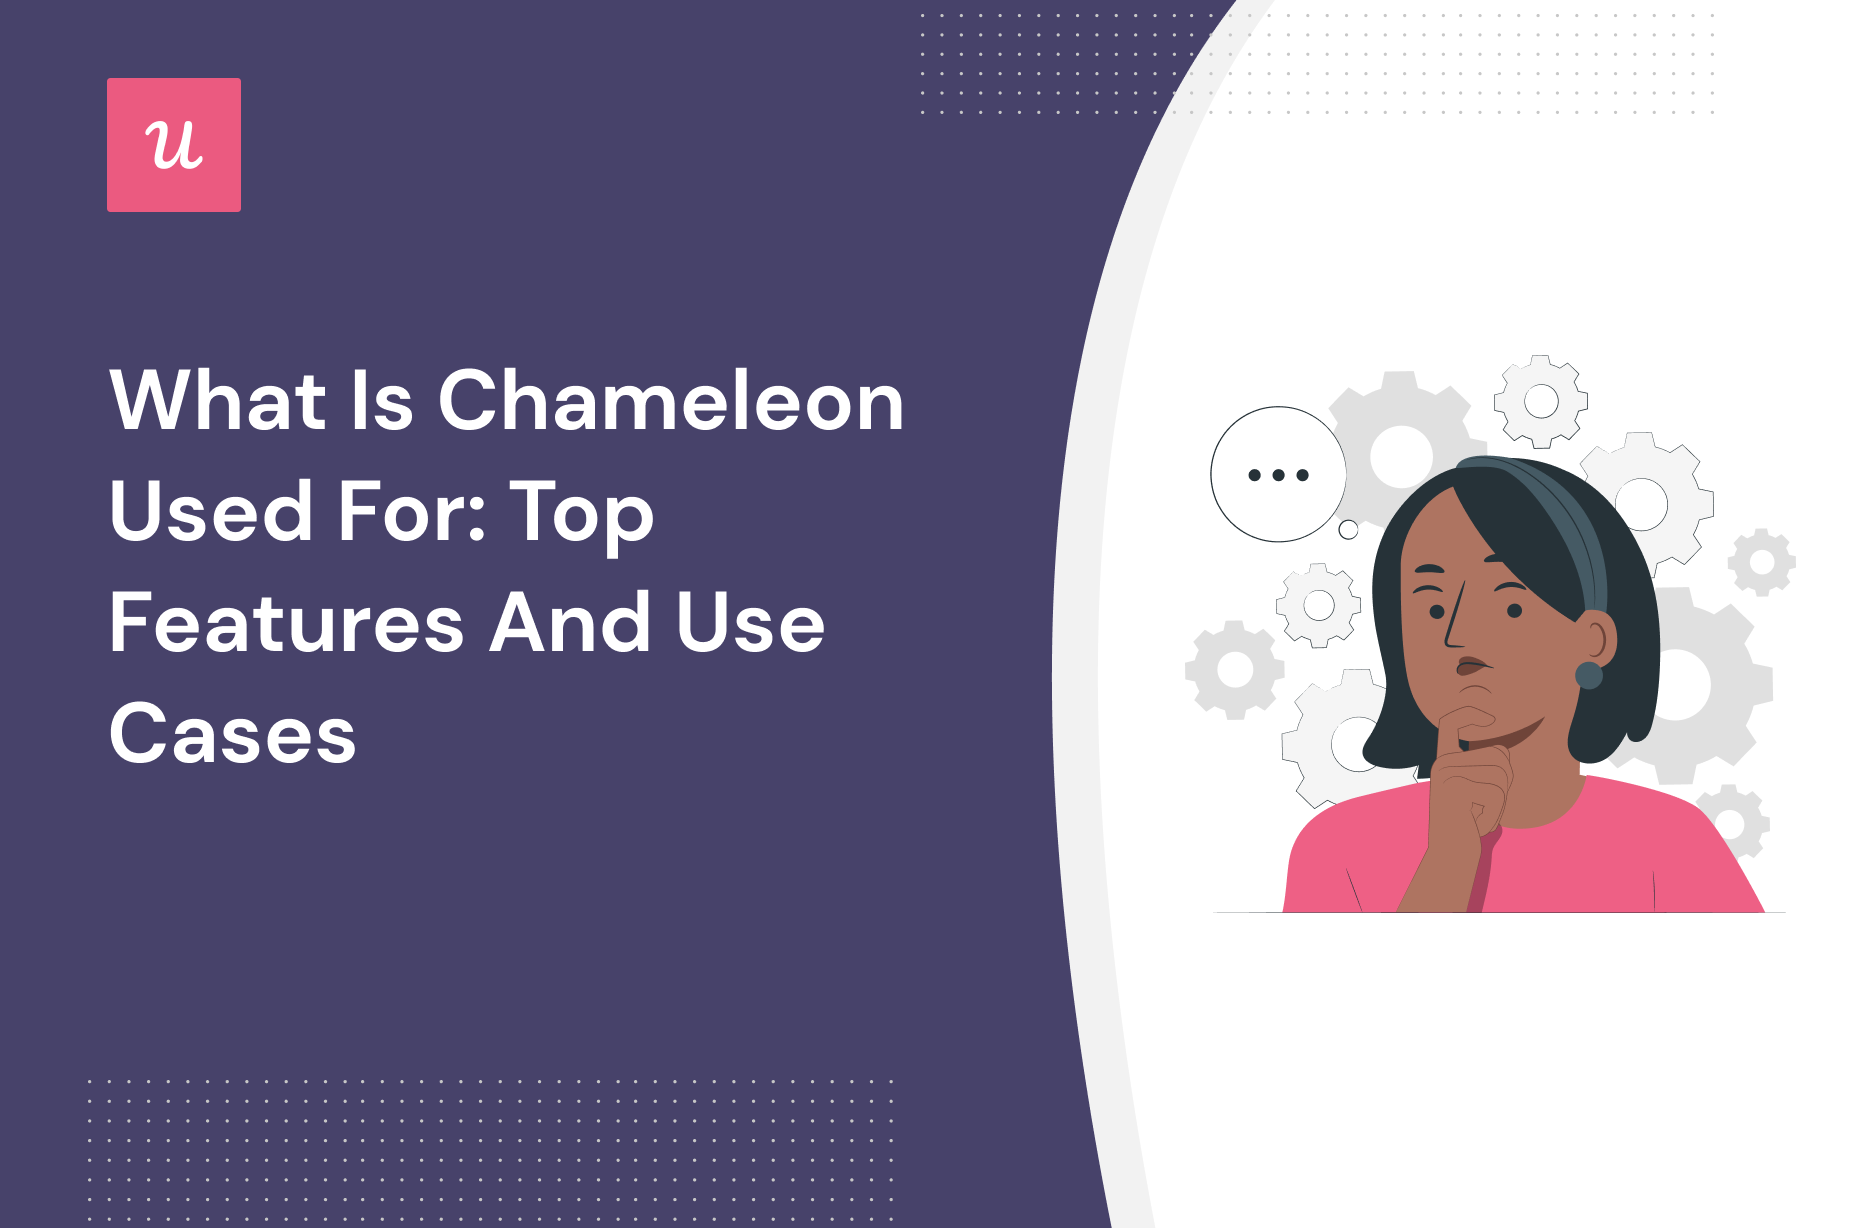 What Is Chameleon Used For: Top Features and Use Cases